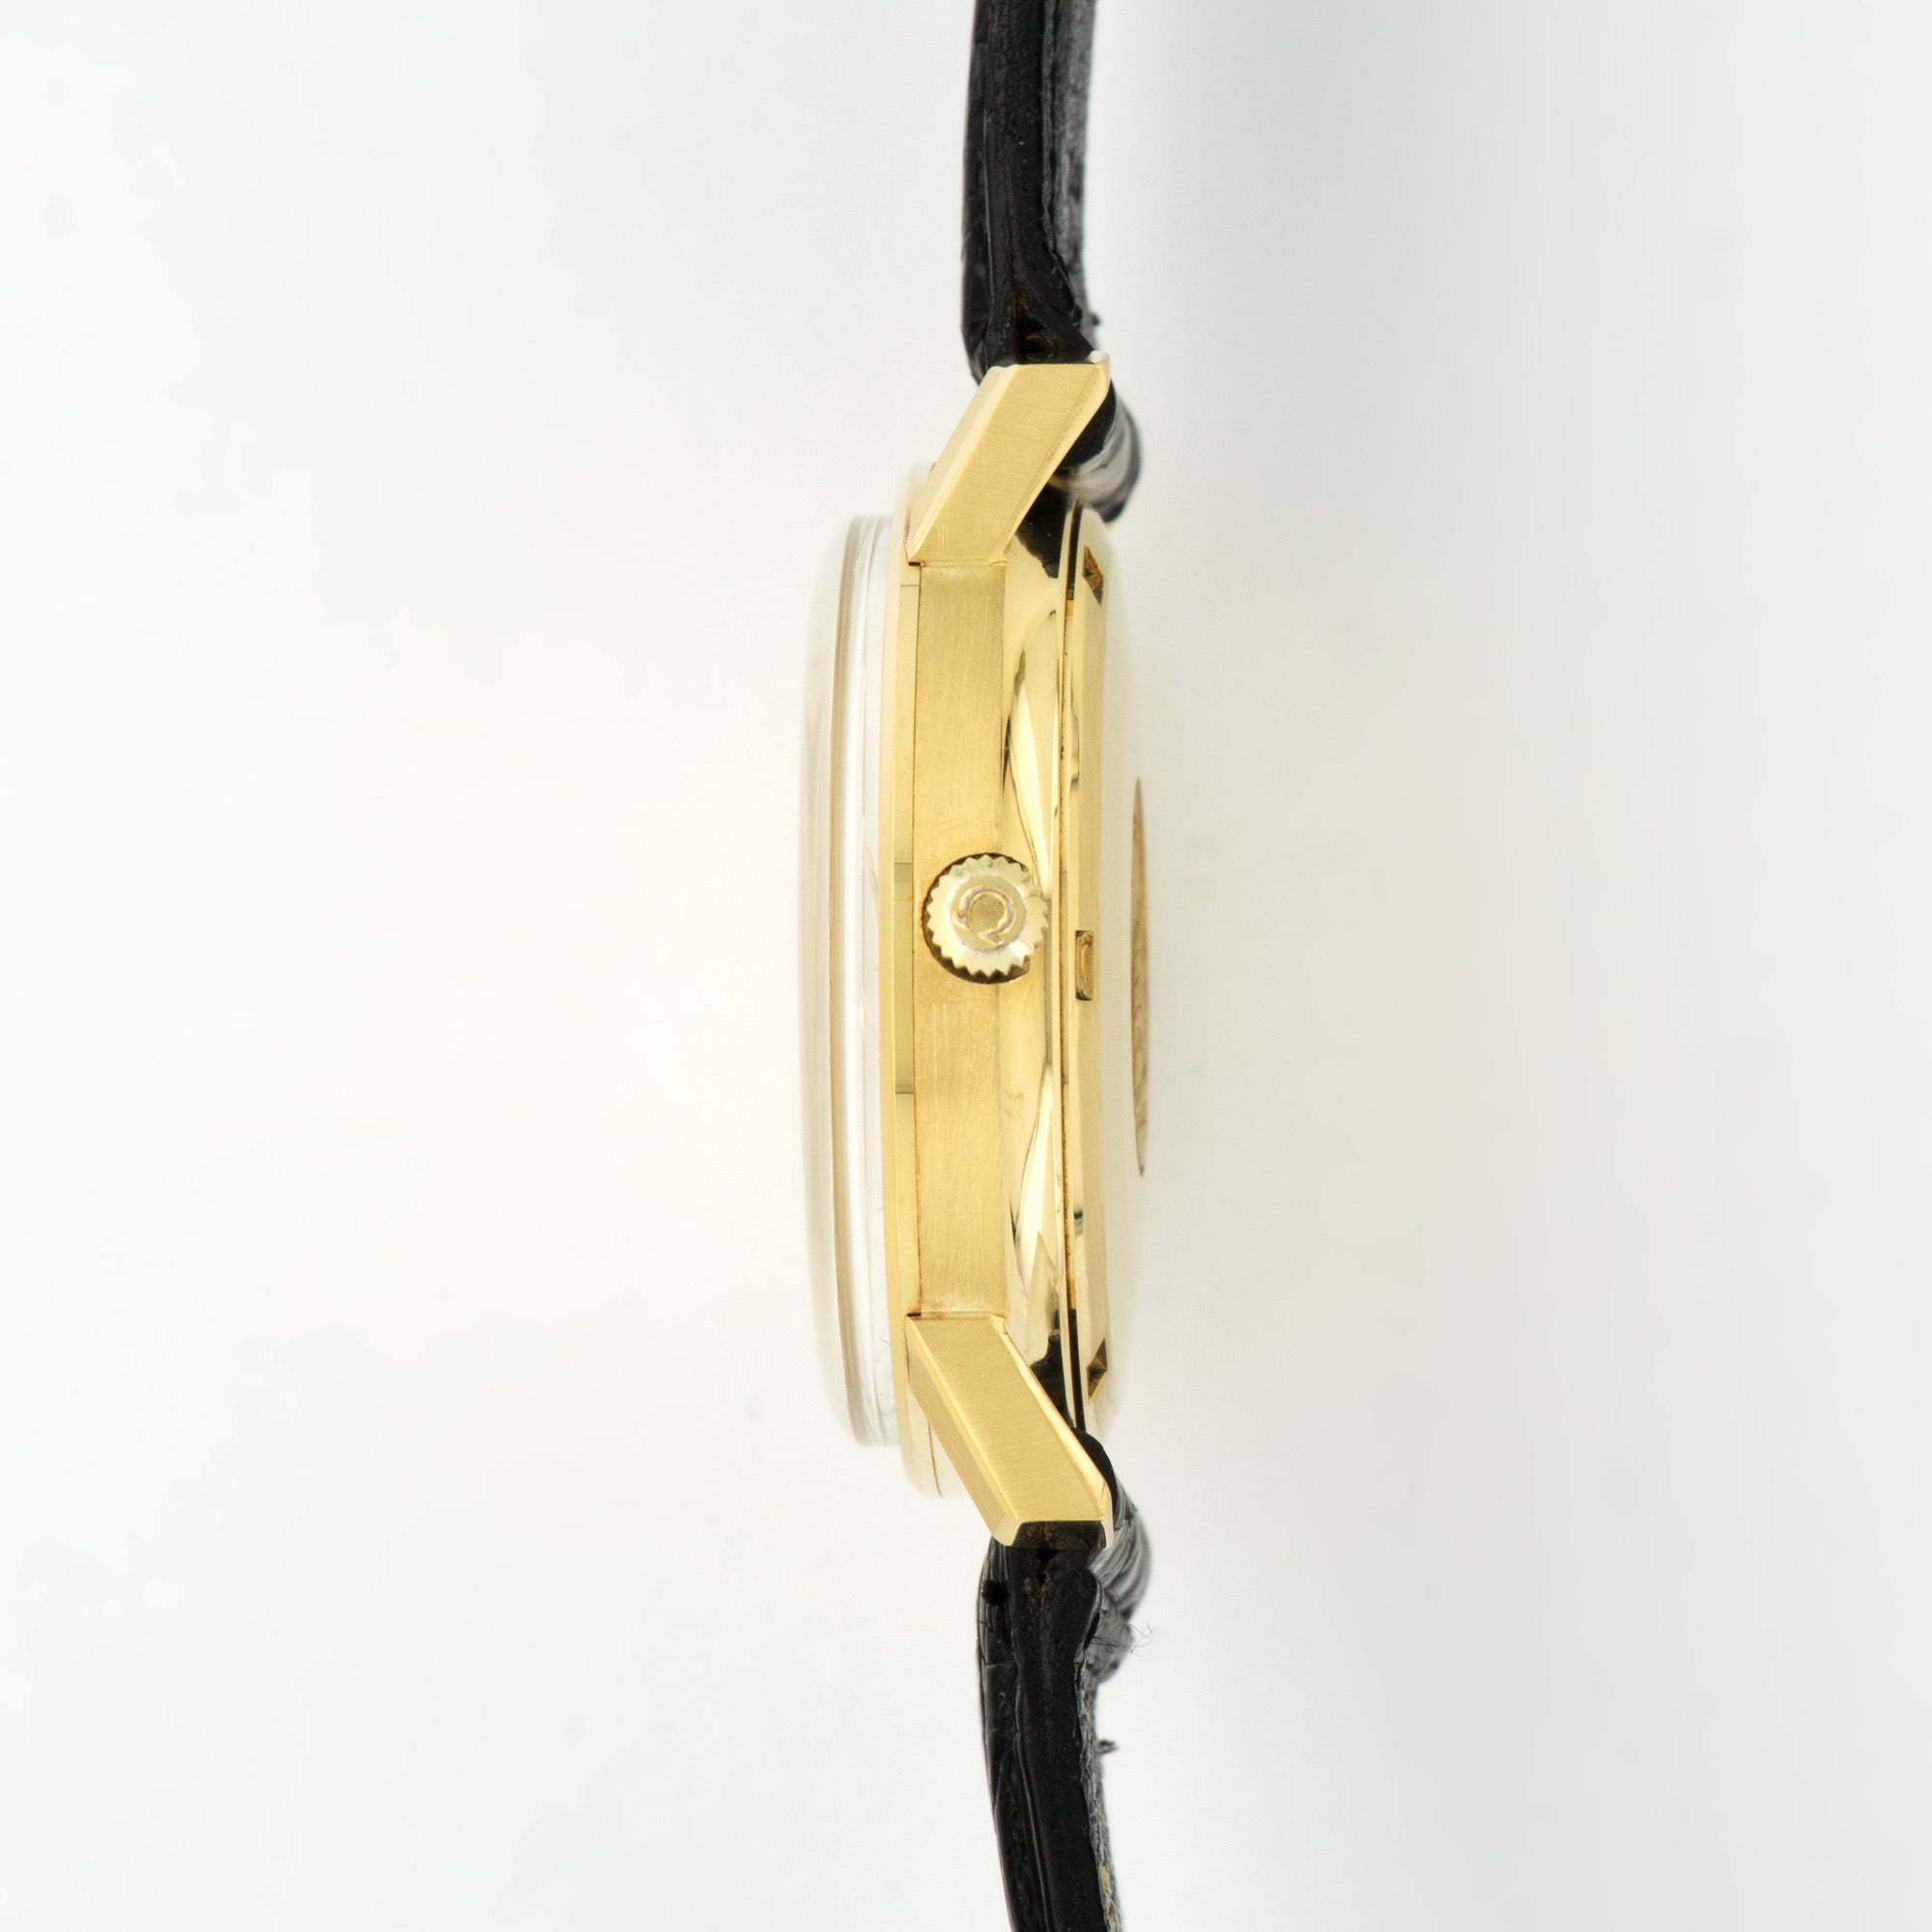 Omega - Omega Yellow Gold Constellation Tiffany &amp; Co. Strap Watch - The Keystone Watches